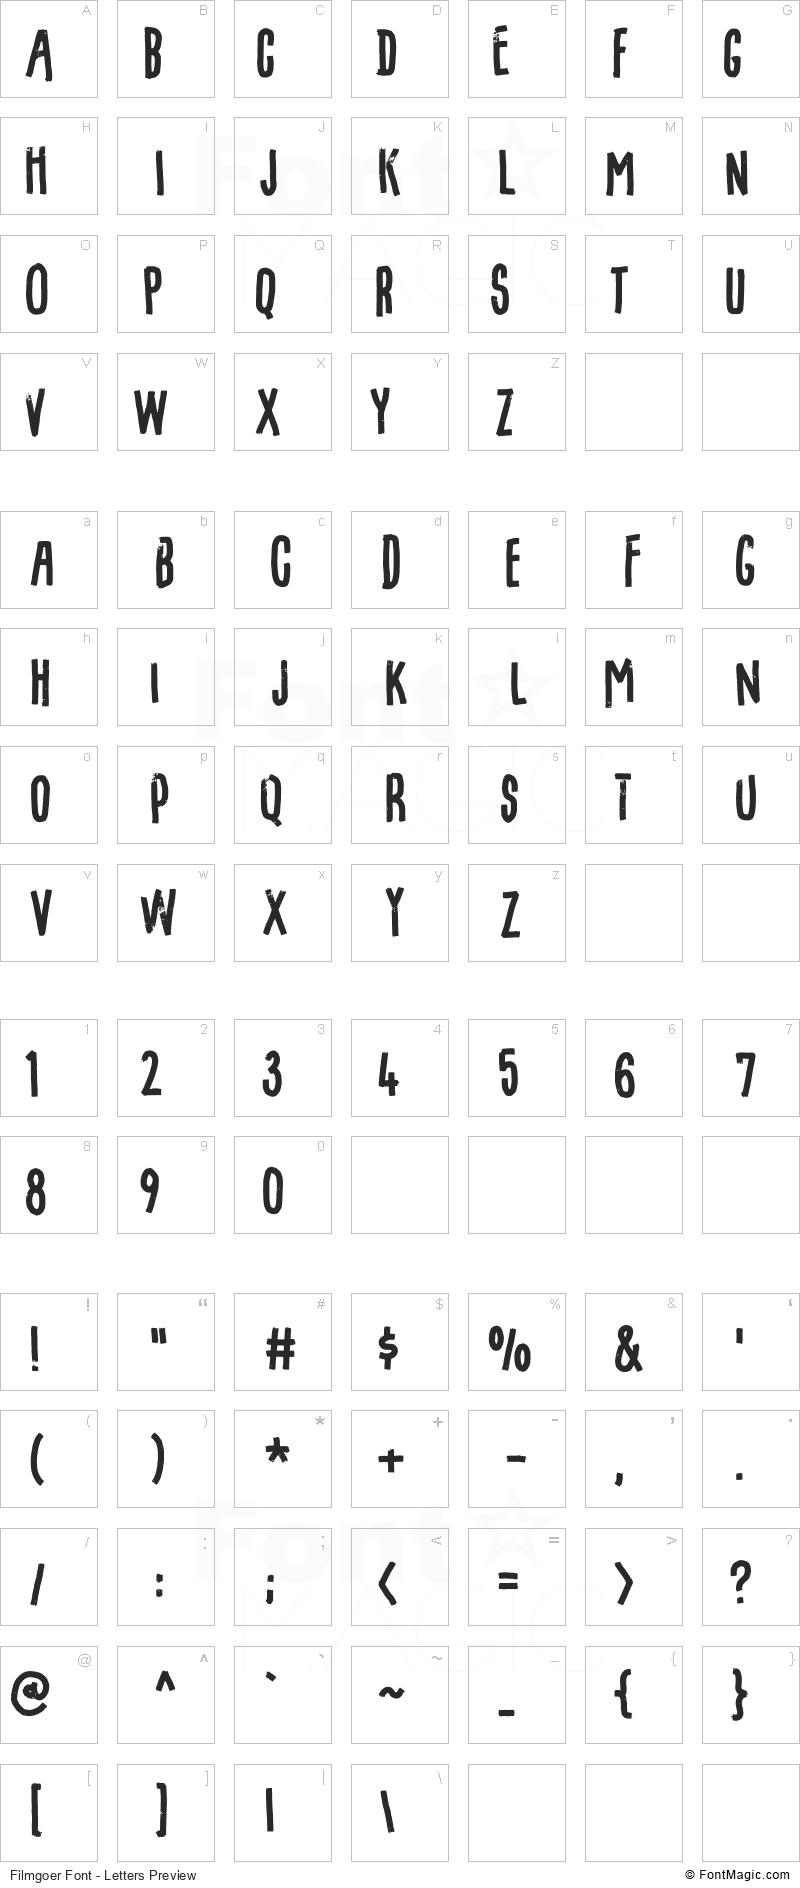 Filmgoer Font - All Latters Preview Chart